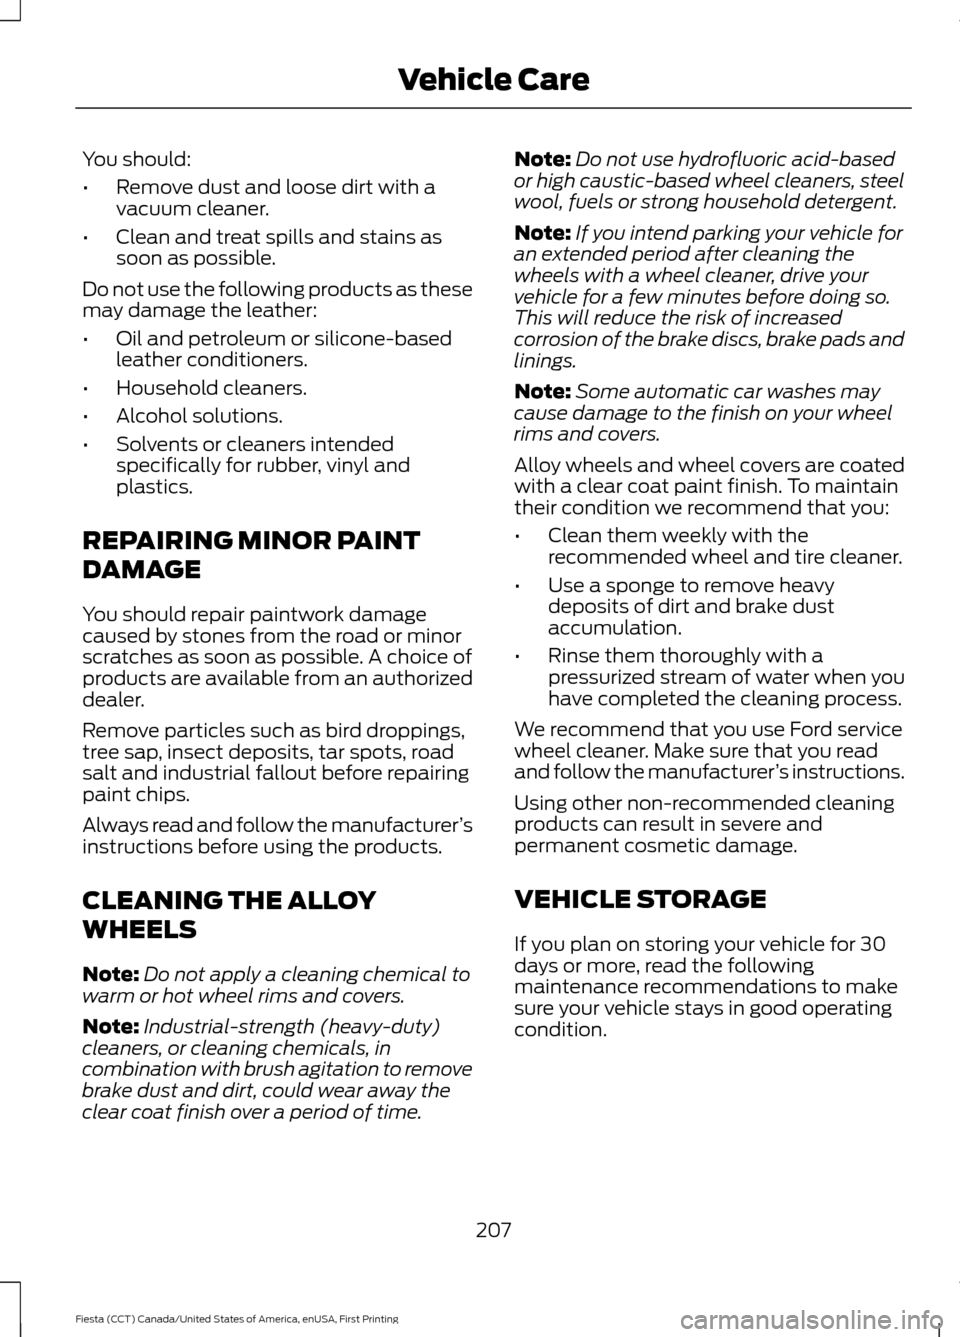 FORD FIESTA 2016 6.G Owners Manual You should:
•
Remove dust and loose dirt with a
vacuum cleaner.
• Clean and treat spills and stains as
soon as possible.
Do not use the following products as these
may damage the leather:
• Oil 